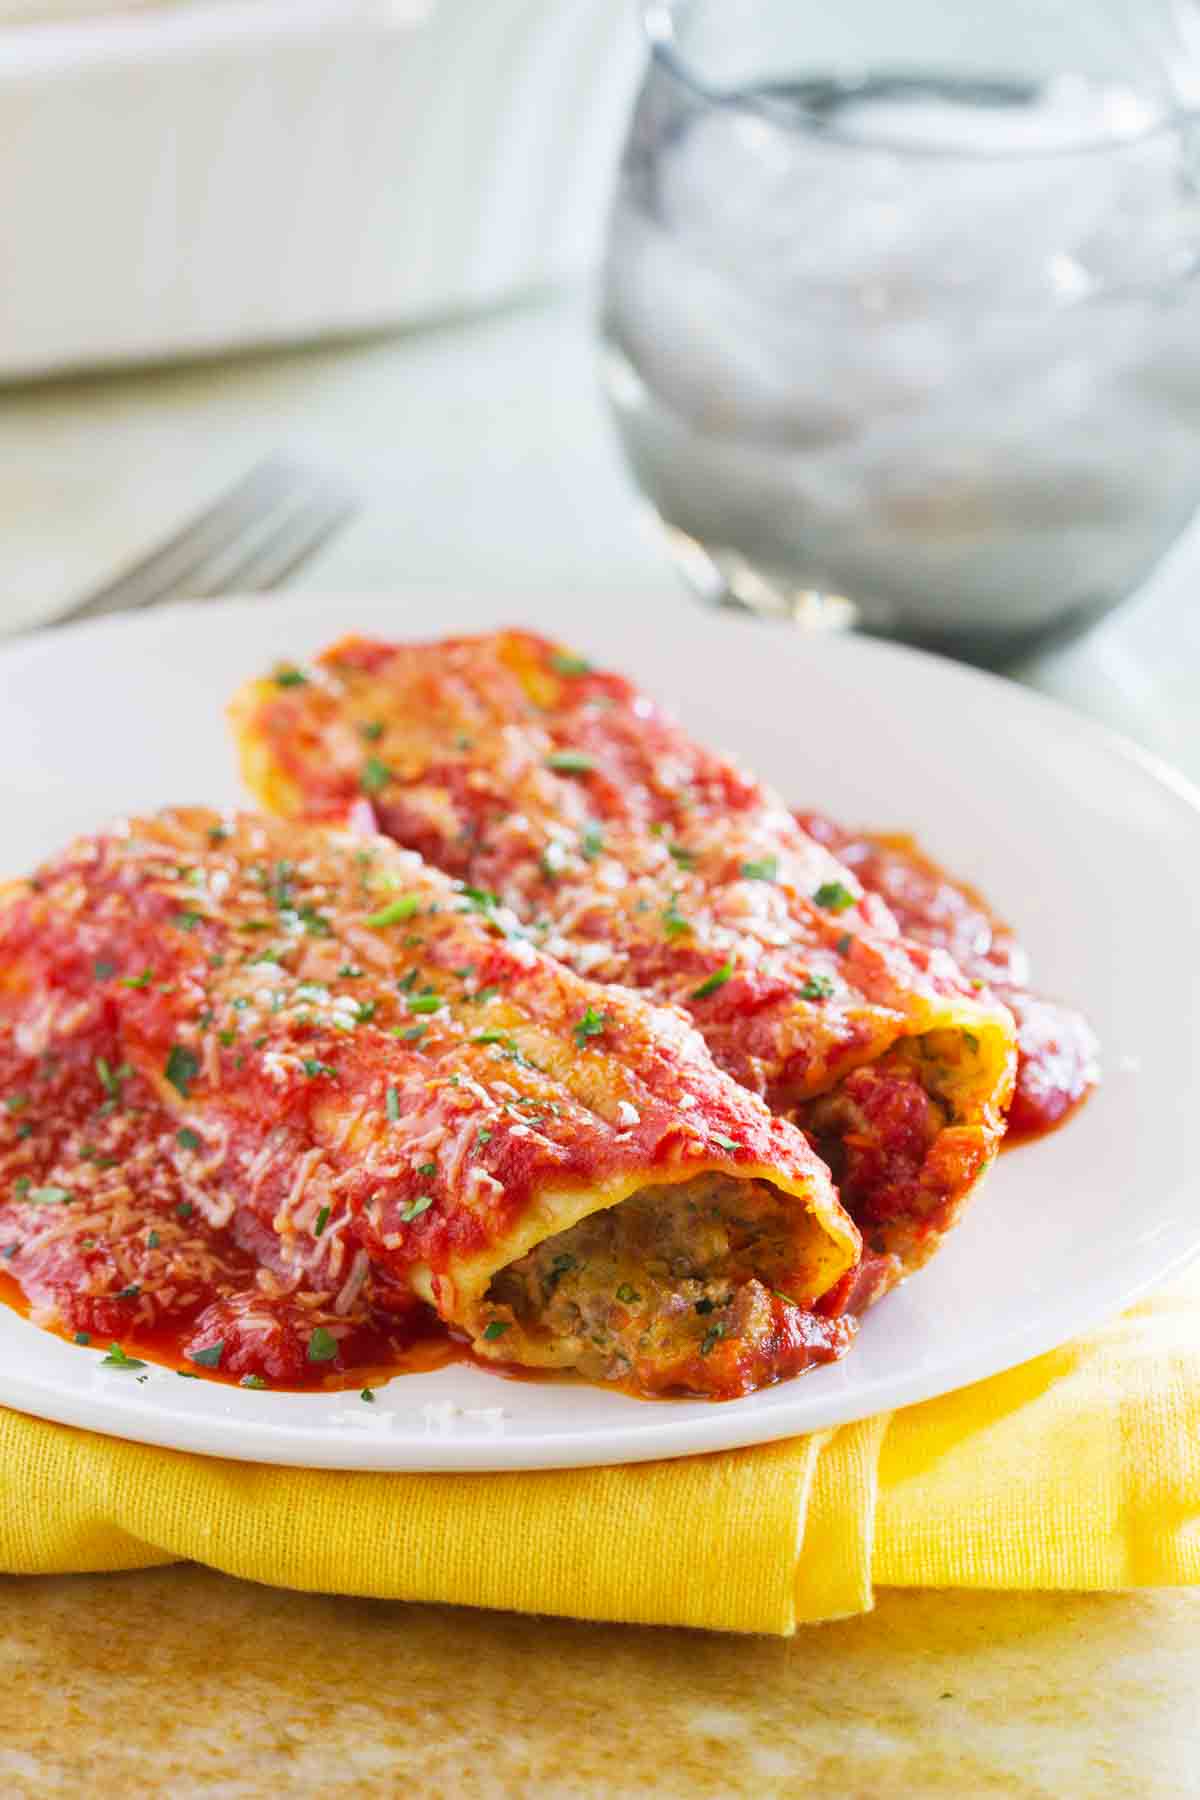 New arrival scrub Indirect Stuffed Manicotti with Beef - Taste and Tell